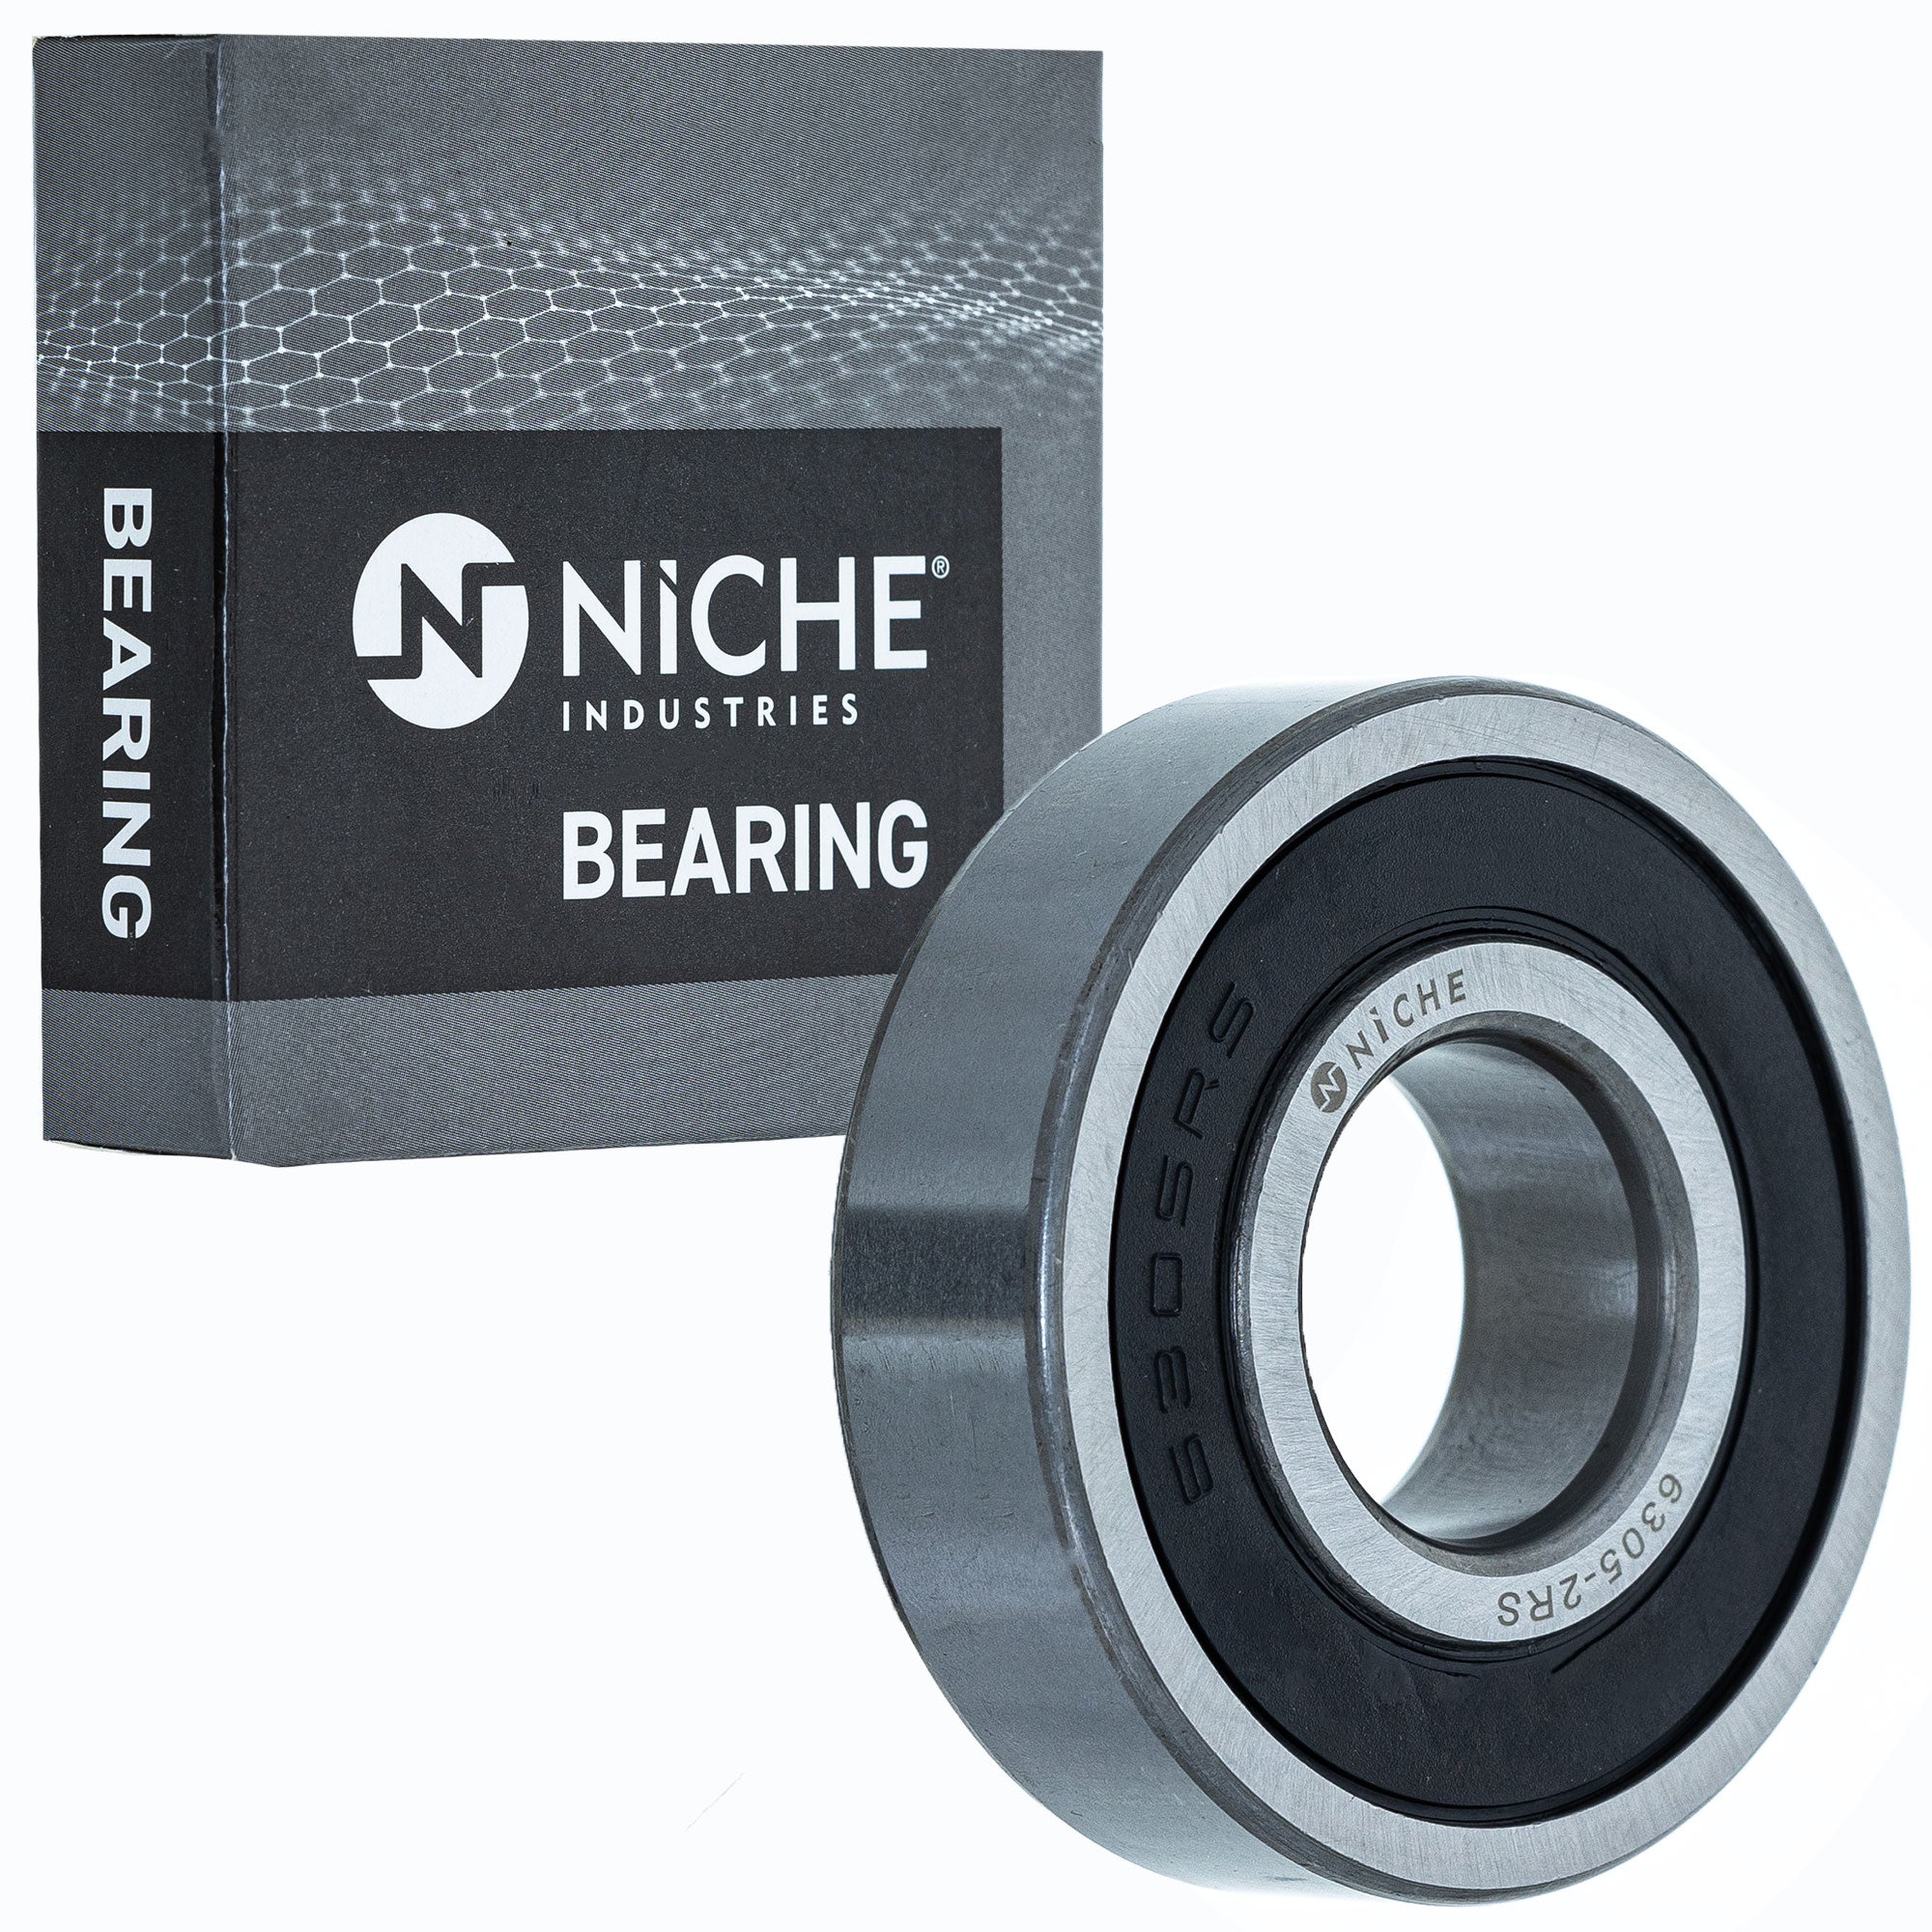 NICHE 519-CBB2231R Bearing 10-Pack for zOTHER YAZOO-KEES Wright